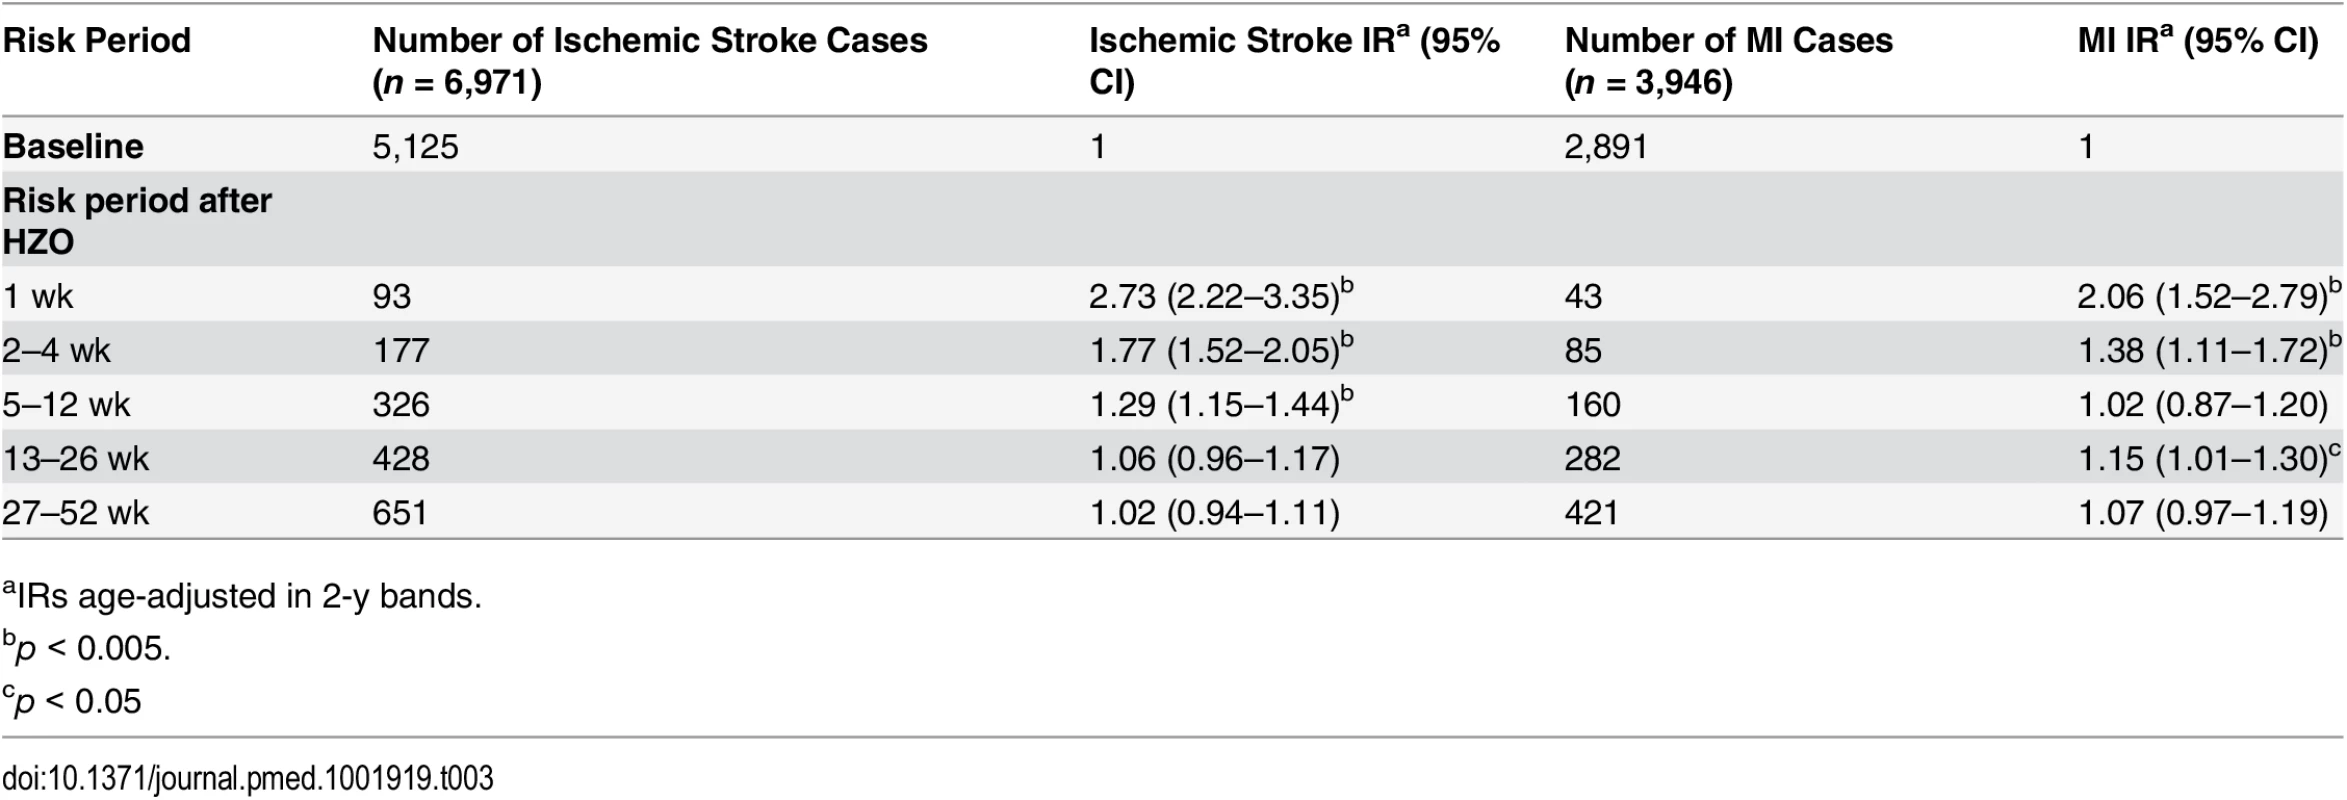 Age-adjusted incidence ratios for ischemic stroke and myocardial infarction in risk periods after herpes zoster ophthalmicus.